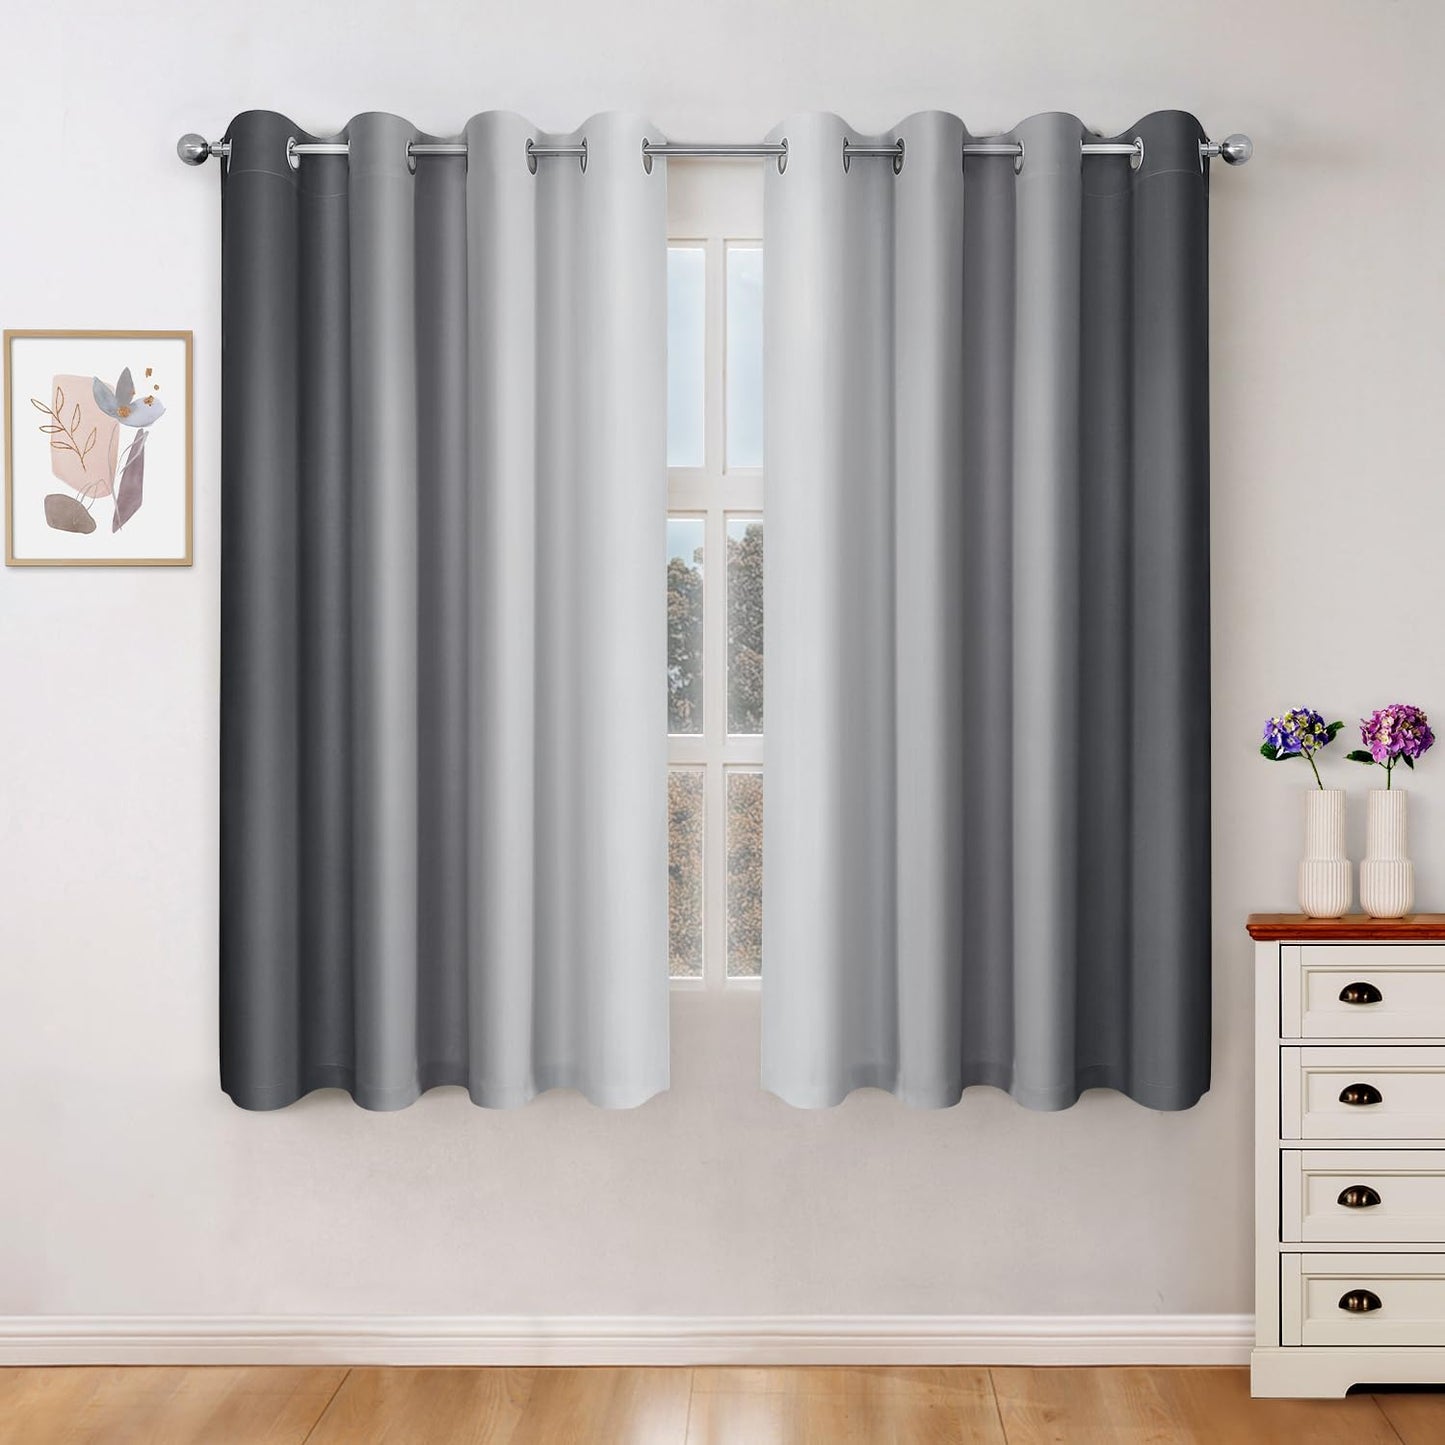 HOMEIDEAS Navy Blue Ombre Blackout Curtains 52 X 84 Inch Length Gradient Room Darkening Thermal Insulated Energy Saving Grommet 2 Panels Window Drapes for Living Room/Bedroom  HOMEIDEAS Grey 1 52"W X 63"L 